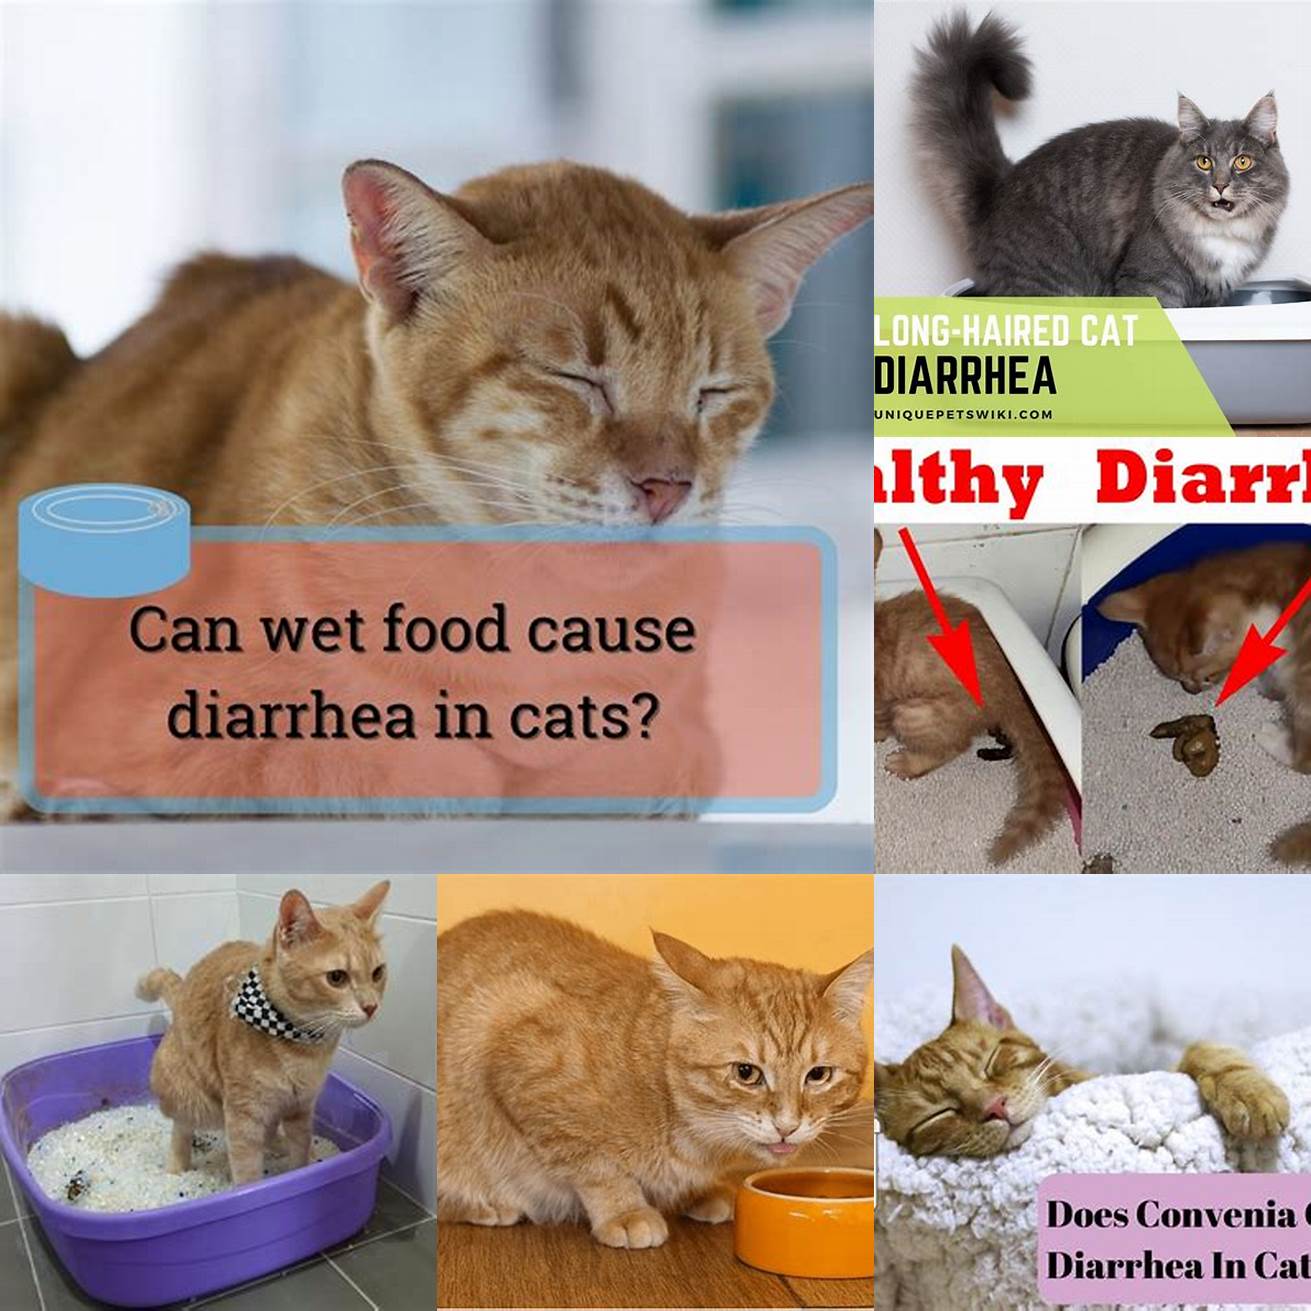 Q Can raw beef cause diarrhea in cats